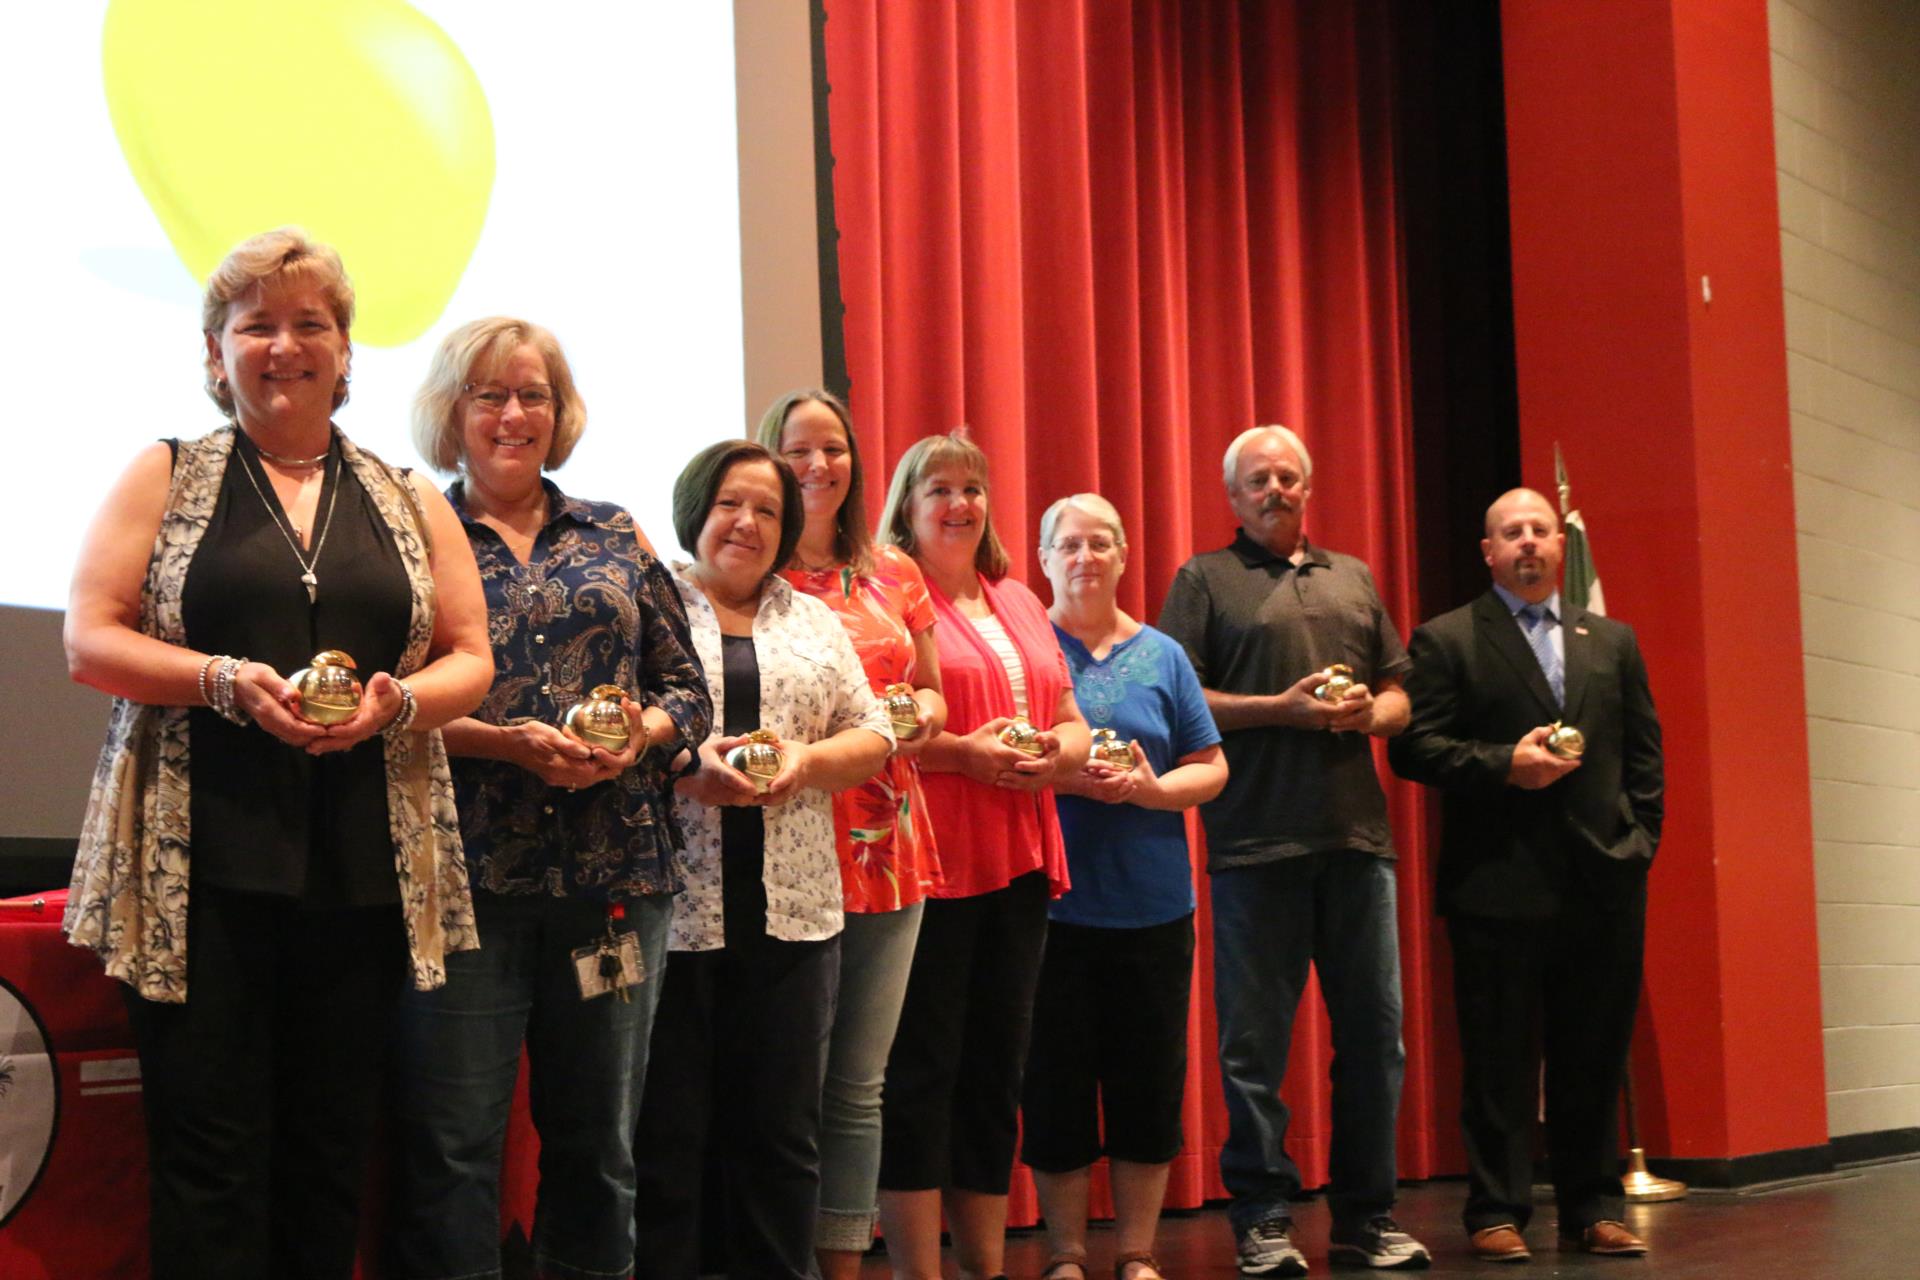 CCS golden apple recipients pose with their golden apple awards.